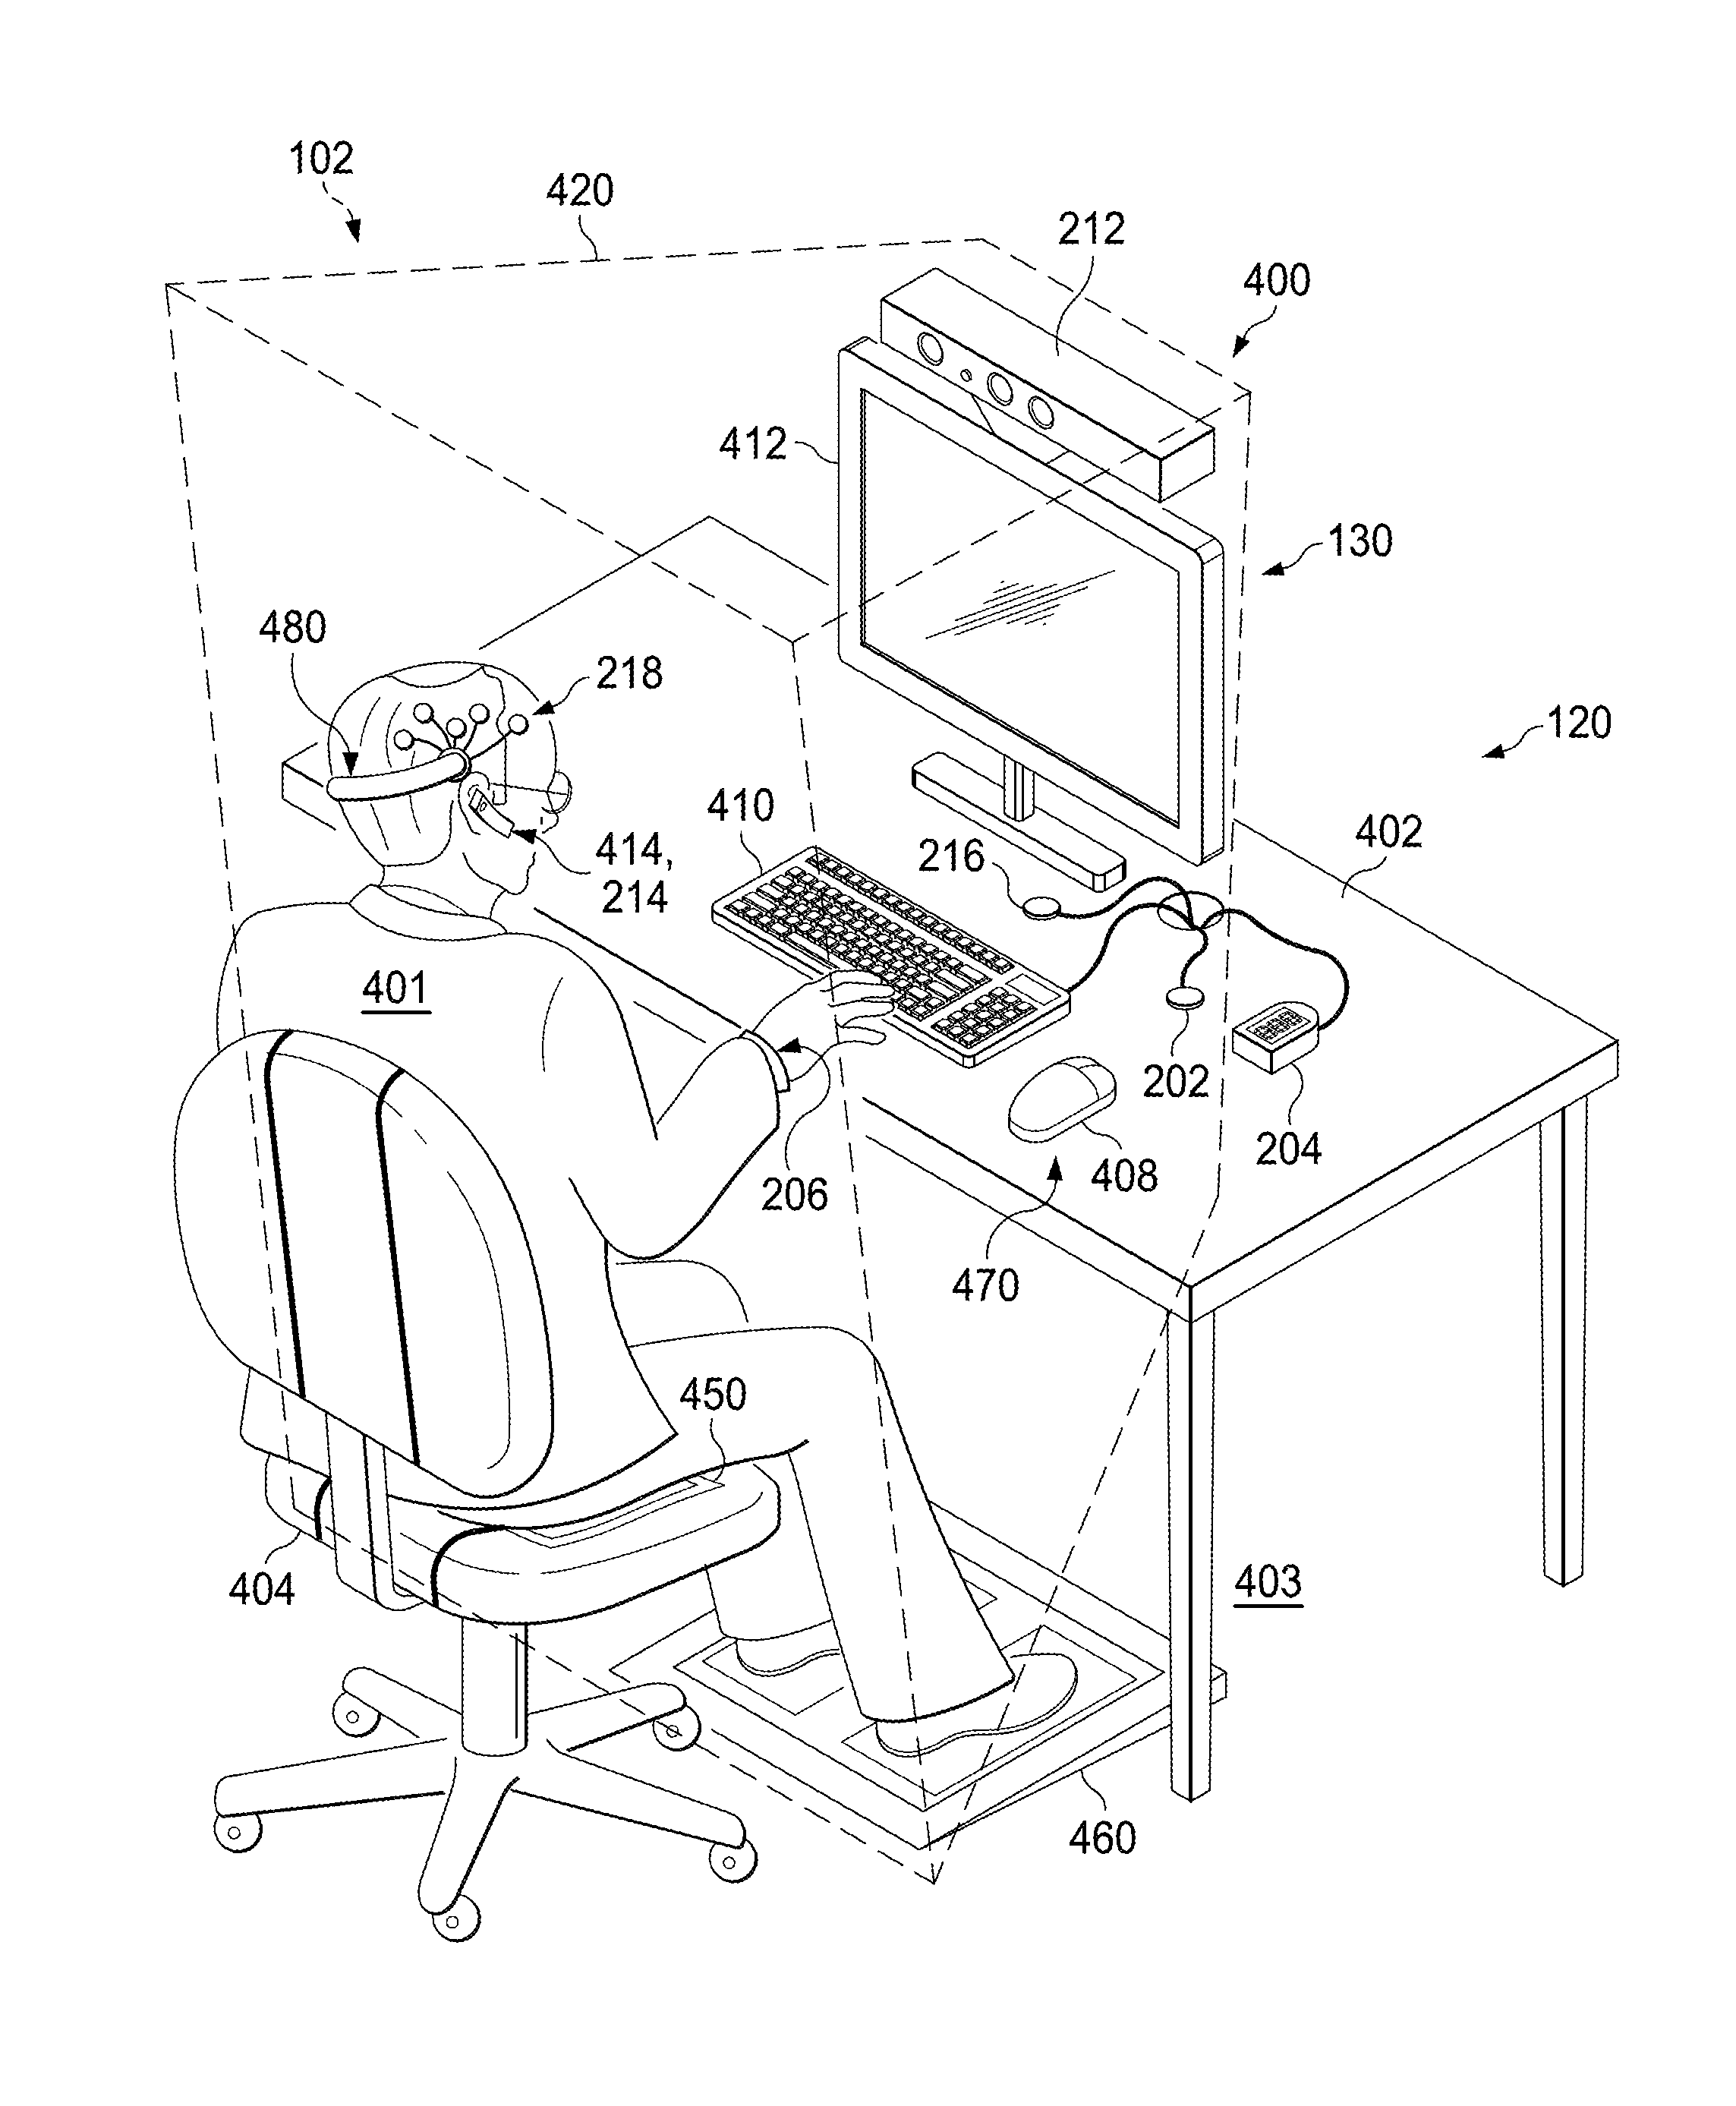 Floor mat system and associated, computer medium and computer-implemented methods for monitoring and improving health and productivity of employees